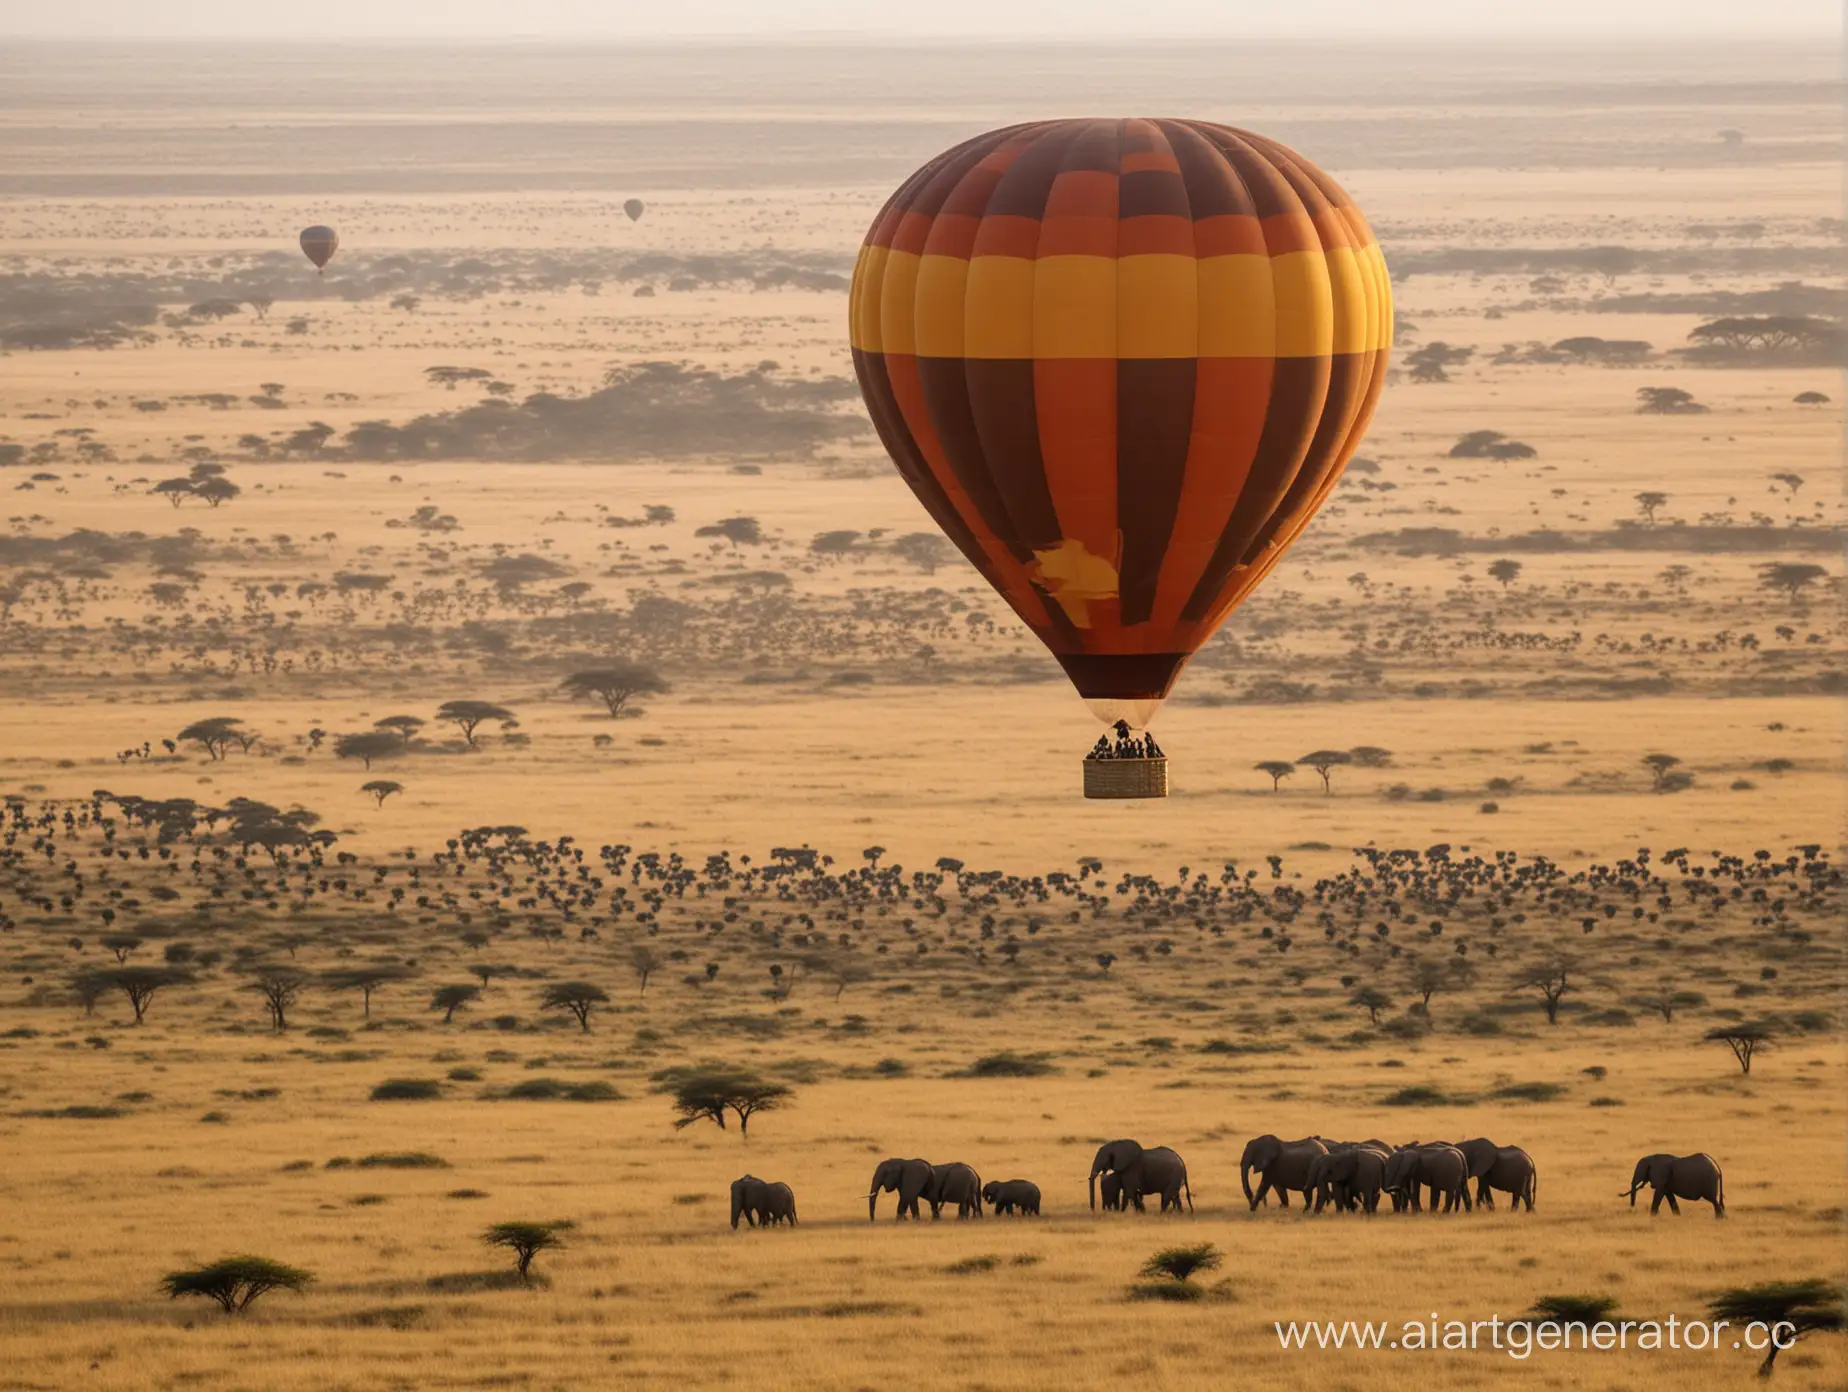 A Serengeti balloon safari is a fantastic once in a lifetime experience to enjoy on your wildlife tour in northern Tanzania. Hot air balloon rides leave from four sites in this prime national park. In Central Serengeti, wildlife gathers year-round in the Seronera River Valley where there is permanent water. The Great Migration passes through around May and June.